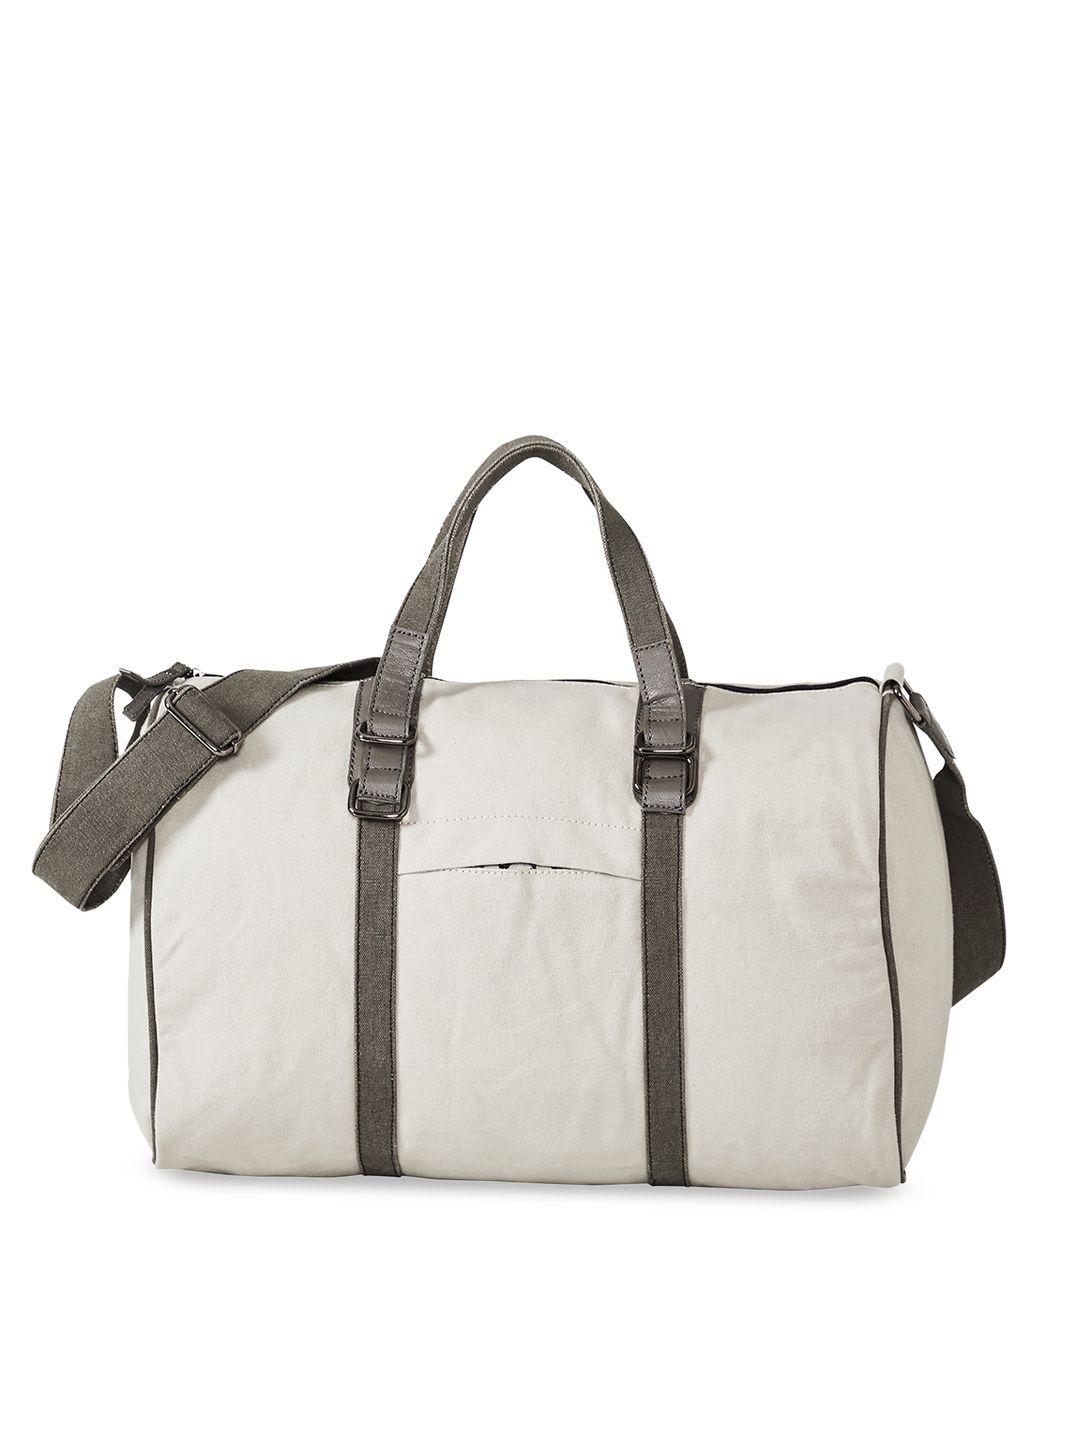 mona b ice grey cotton canvas travel bag with outside pocket and stylish design